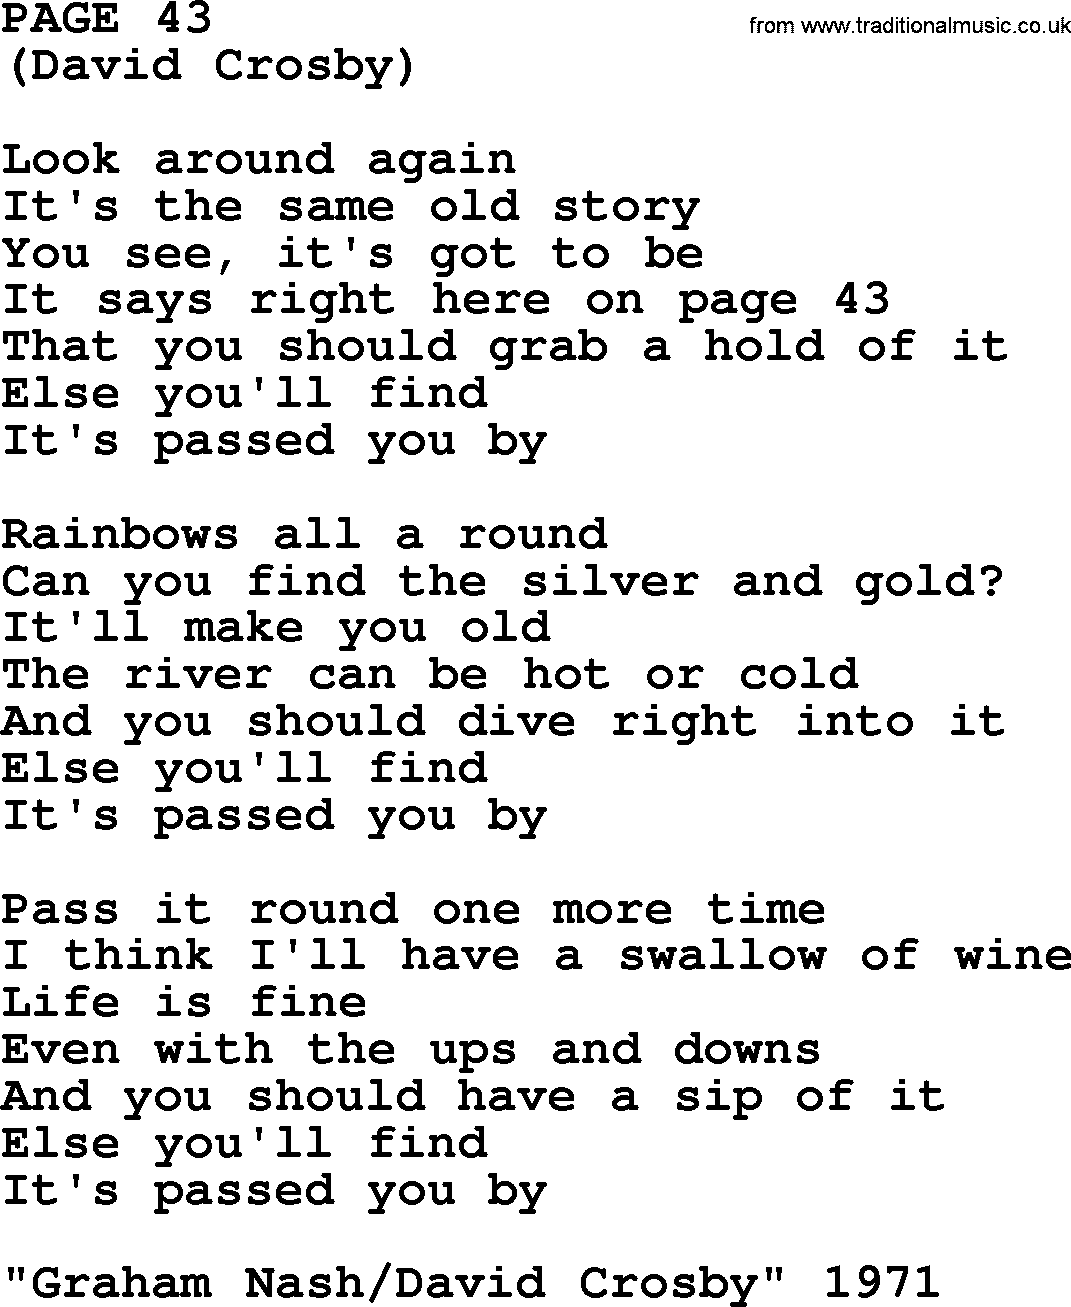 The Byrds song Page 43, lyrics